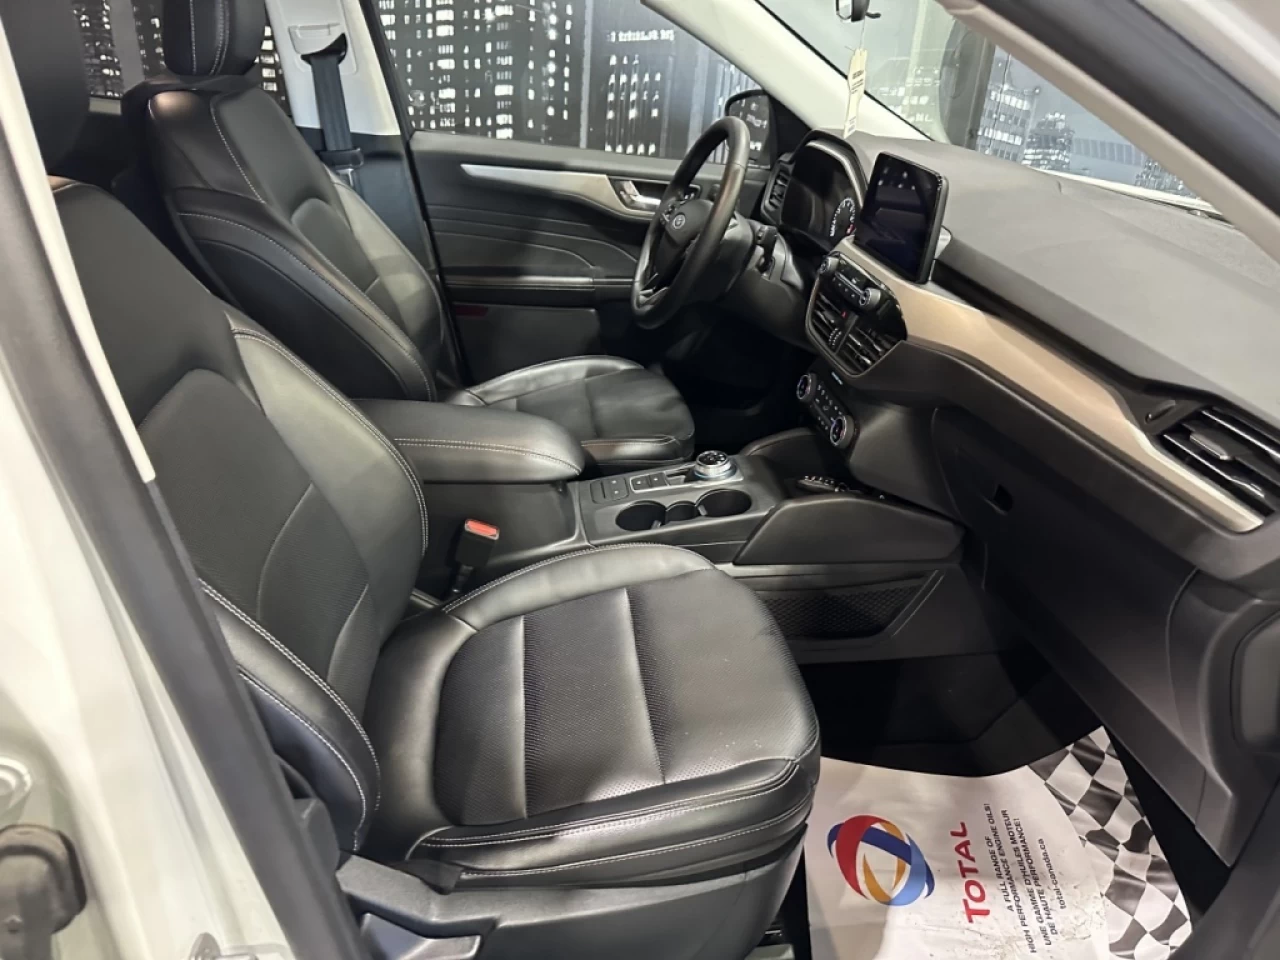 2022 Ford Escape SEL AWD FULL CUIR GPS SEULEMENT 43 700KM Main Image